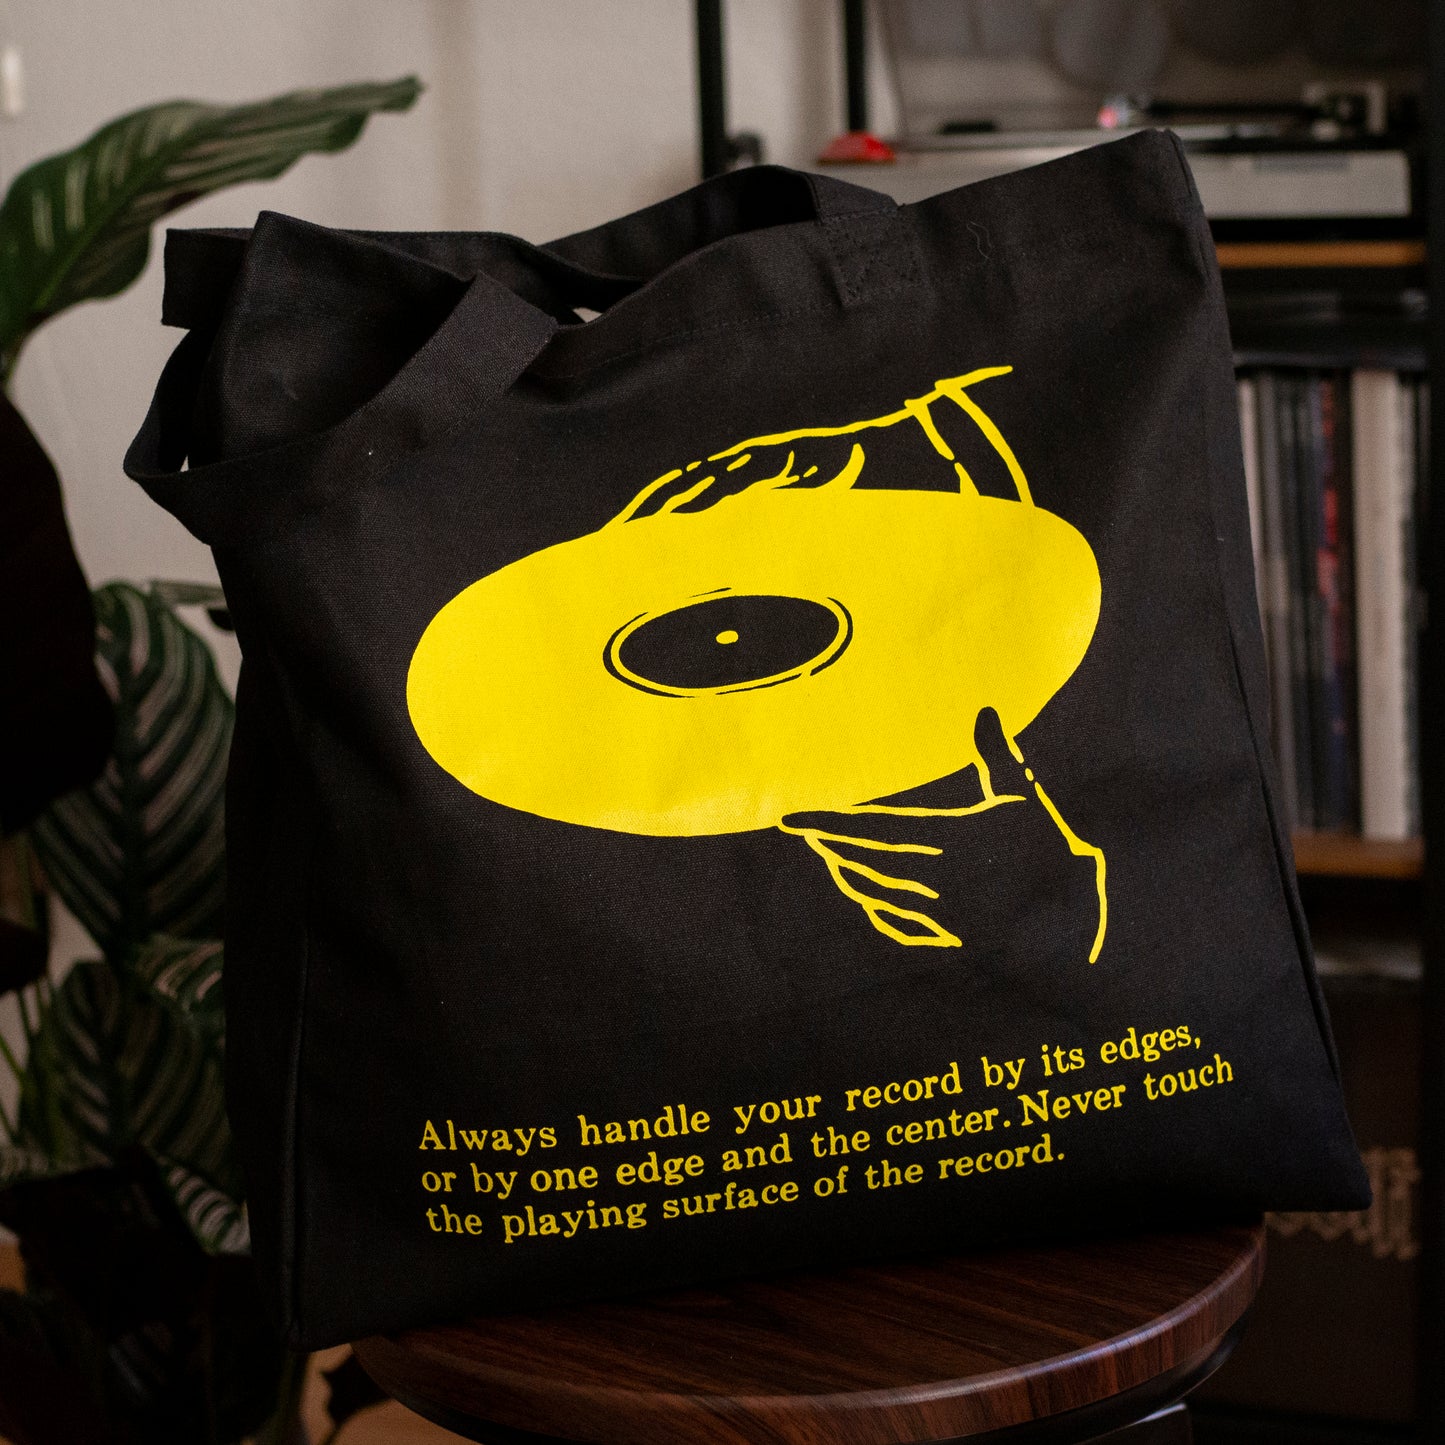 Take Care of Your Records - Maxi Tote Bag